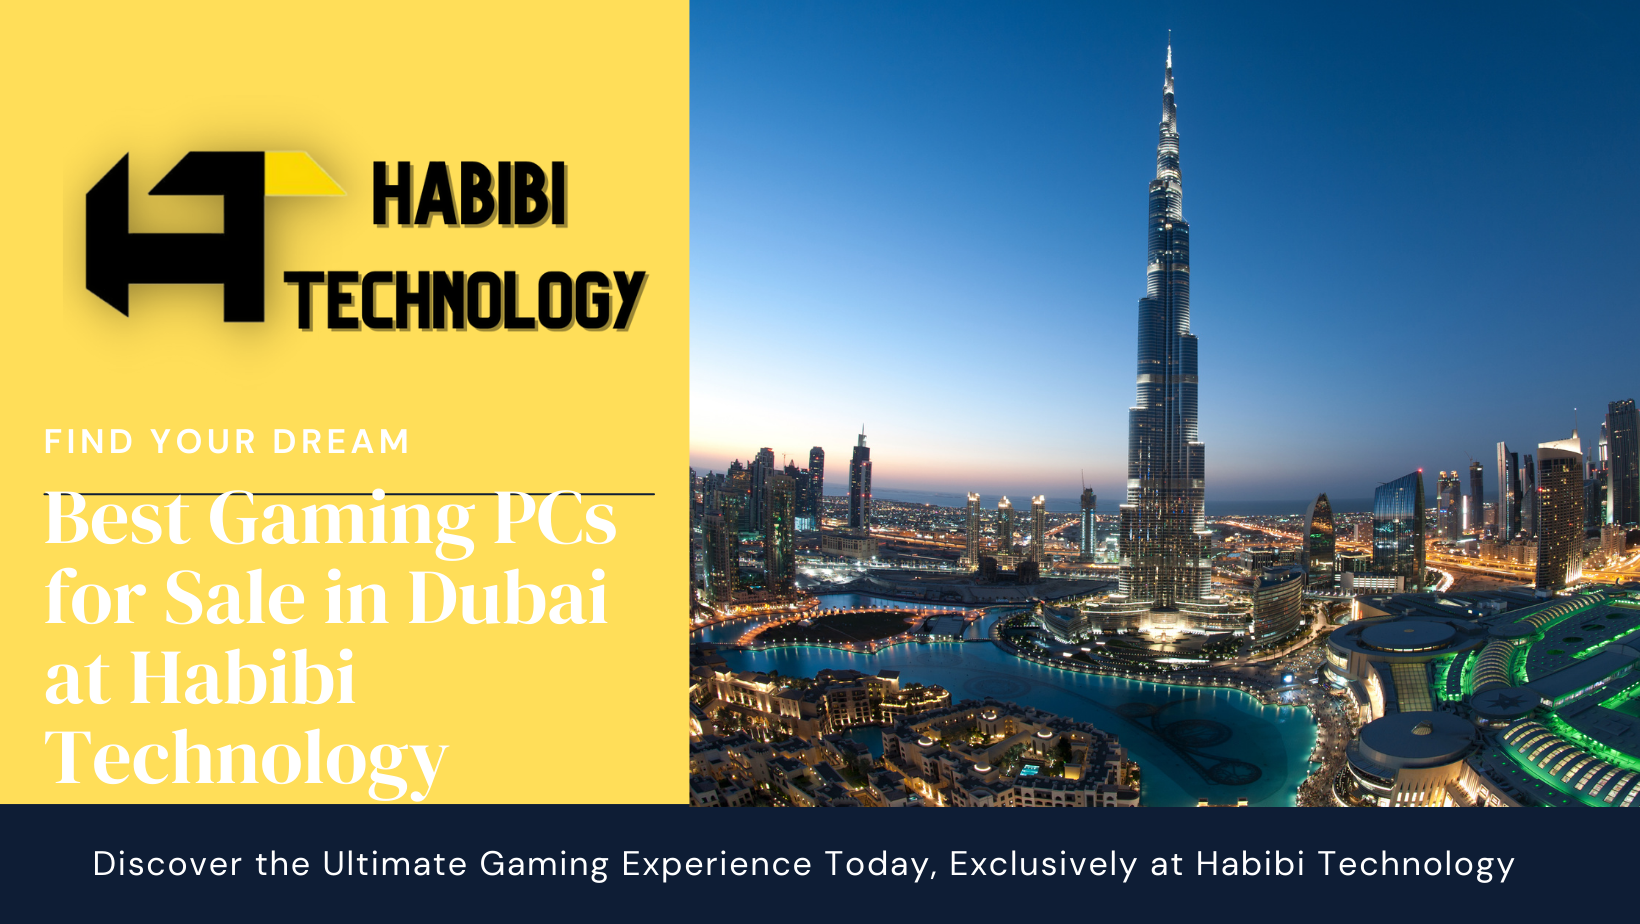 Gaming PC for Sale in Dubai: Discover the Best at Habibi Technology